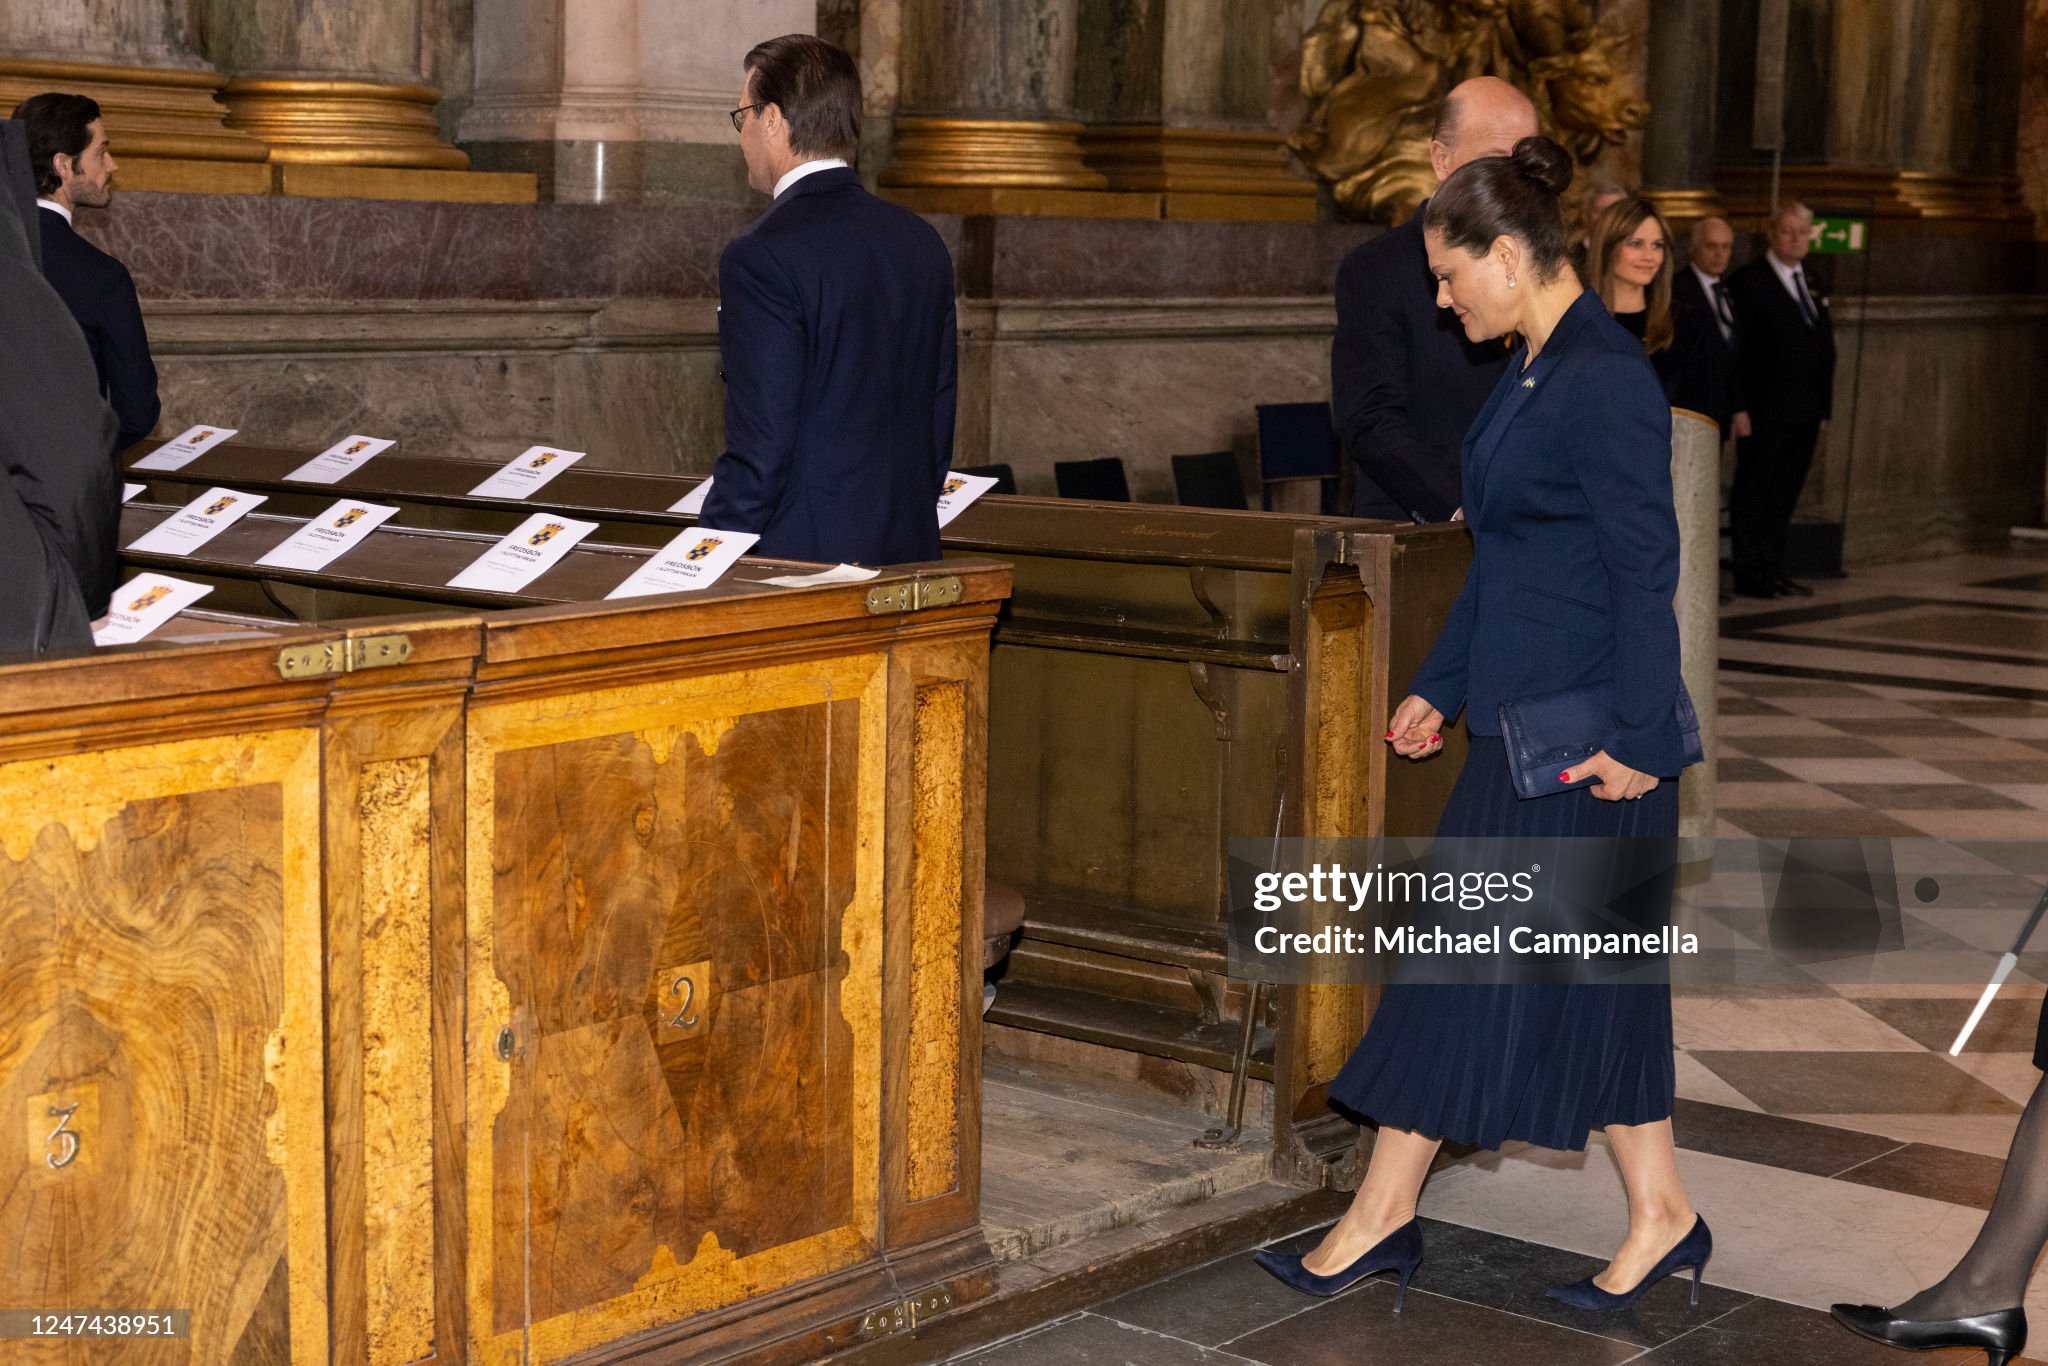 prince-daniel-and-crown-princess-victoria-of-sweden-attend-a-peace-prayer-marking-the-one-year.jpg